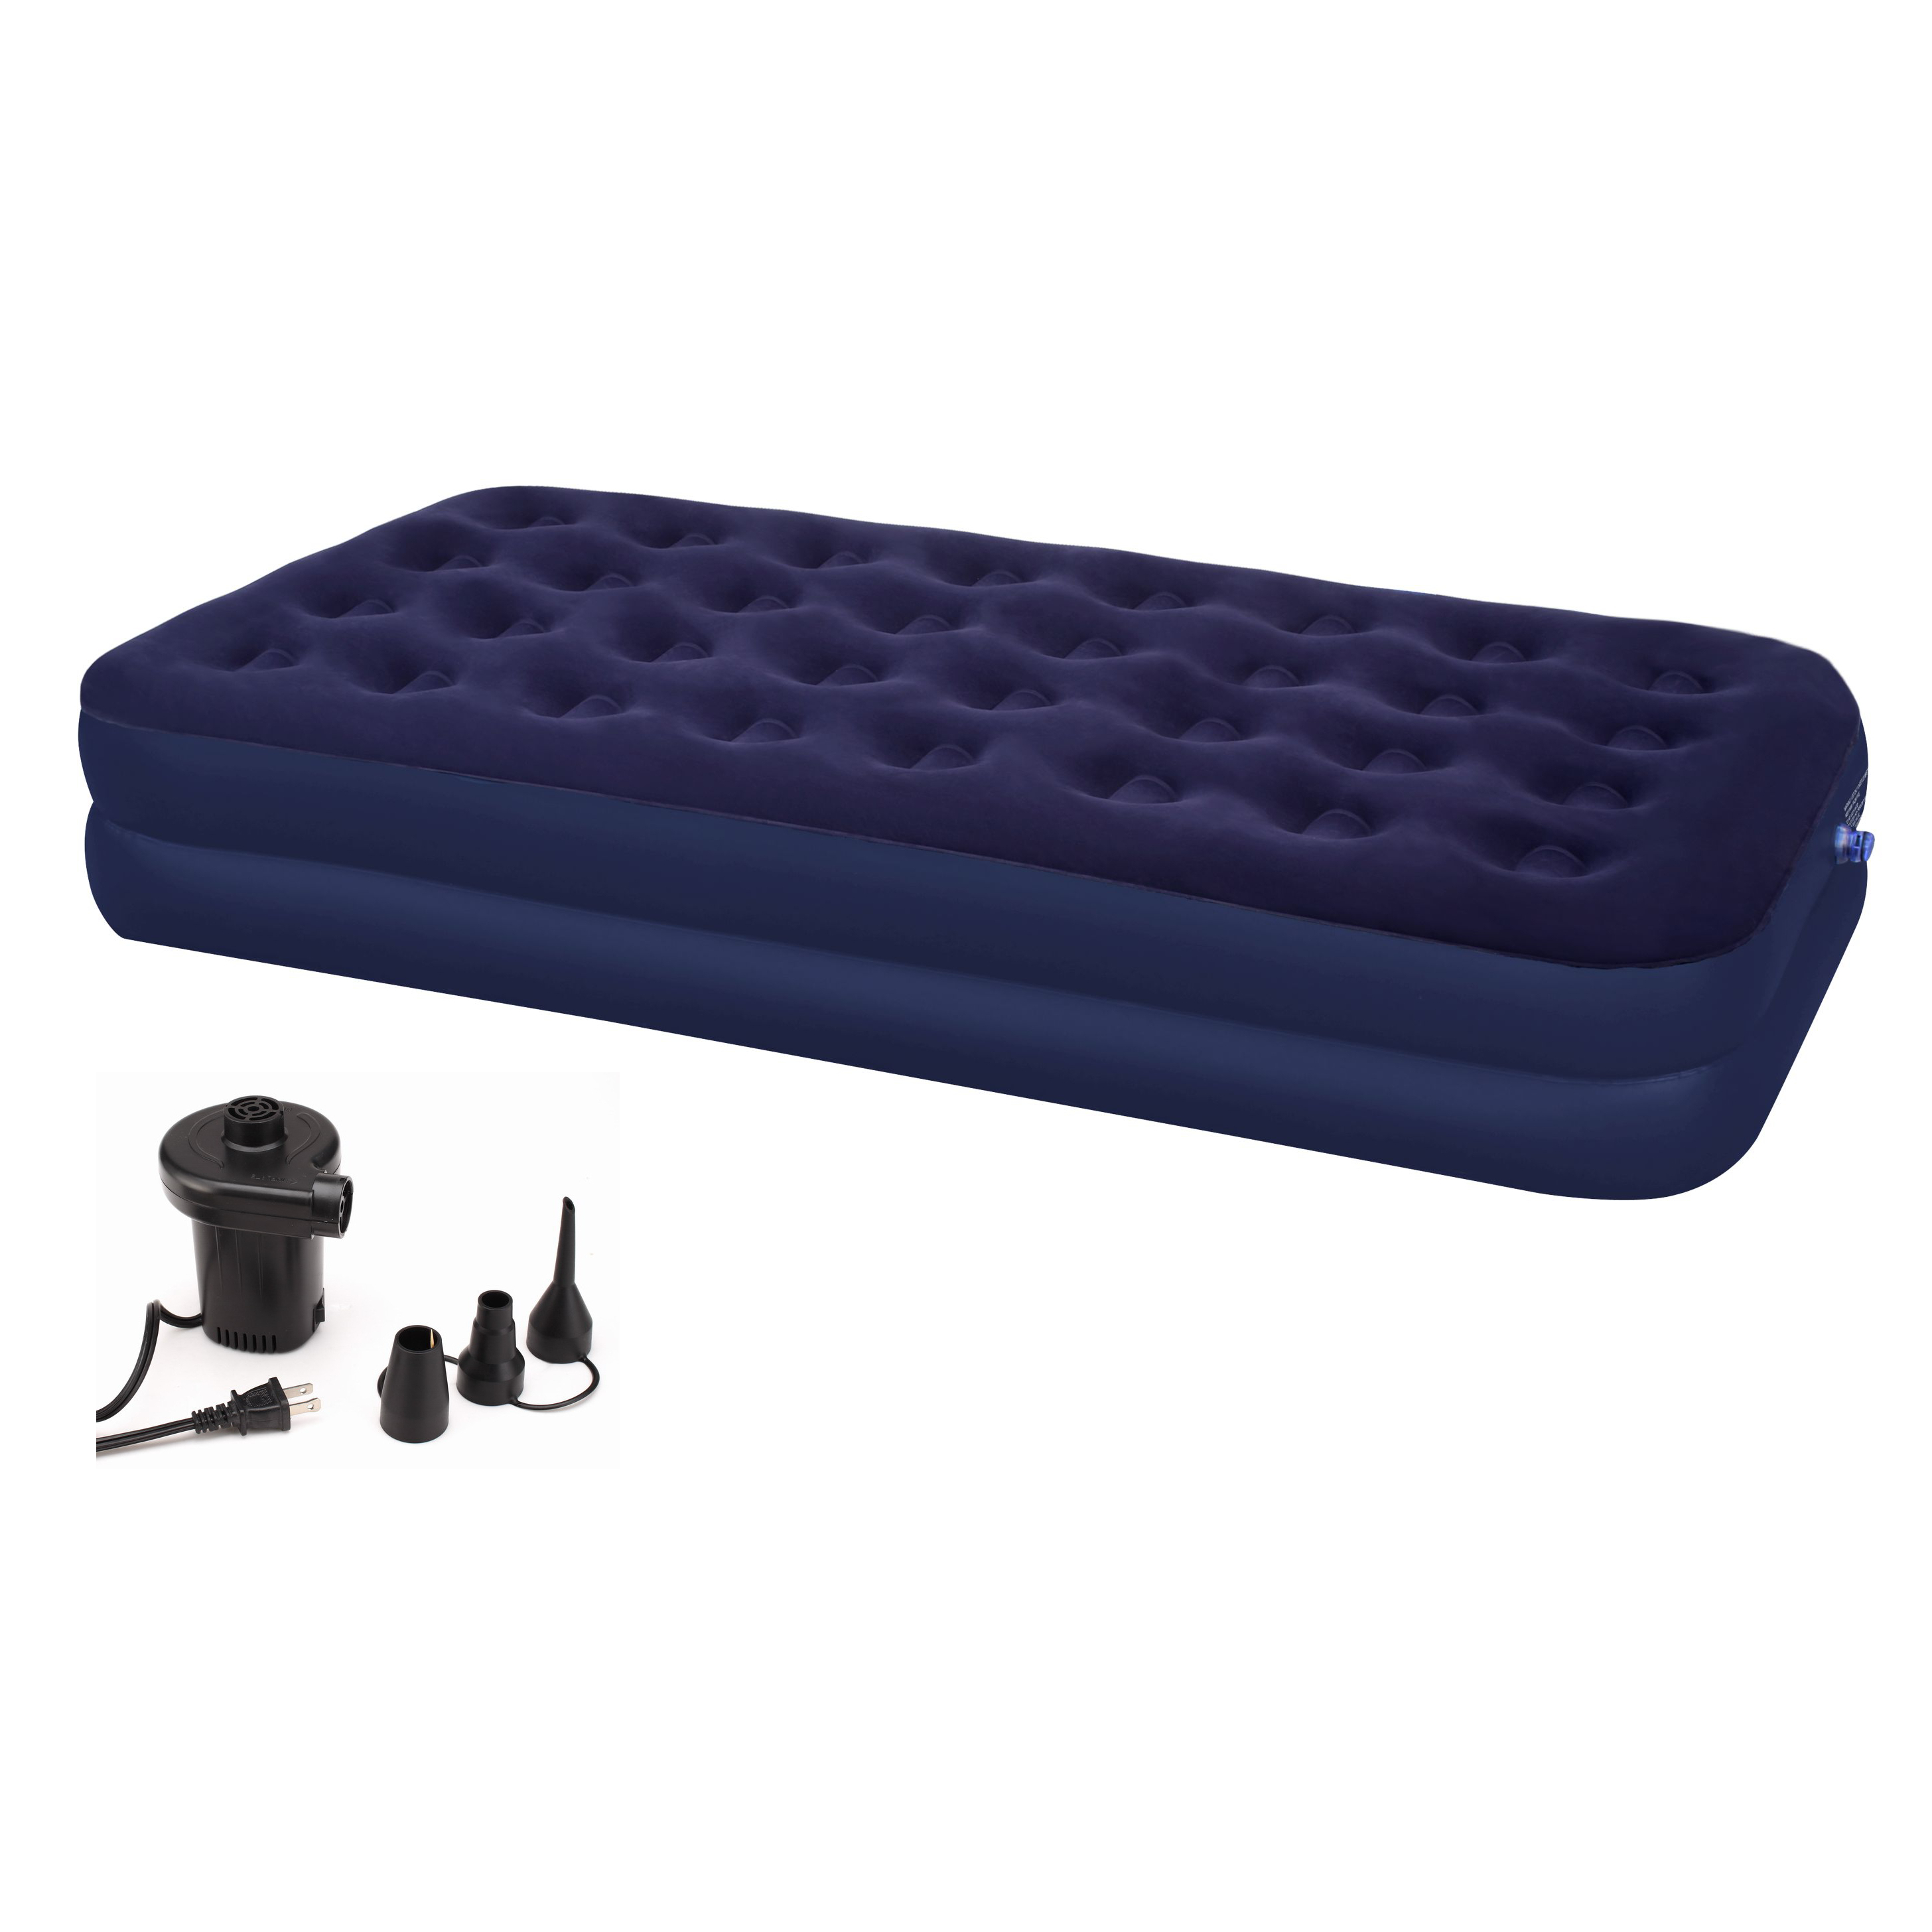 Achim Importing Co. Second Avenue Double Twin Air Mattress with Electric Air Pump